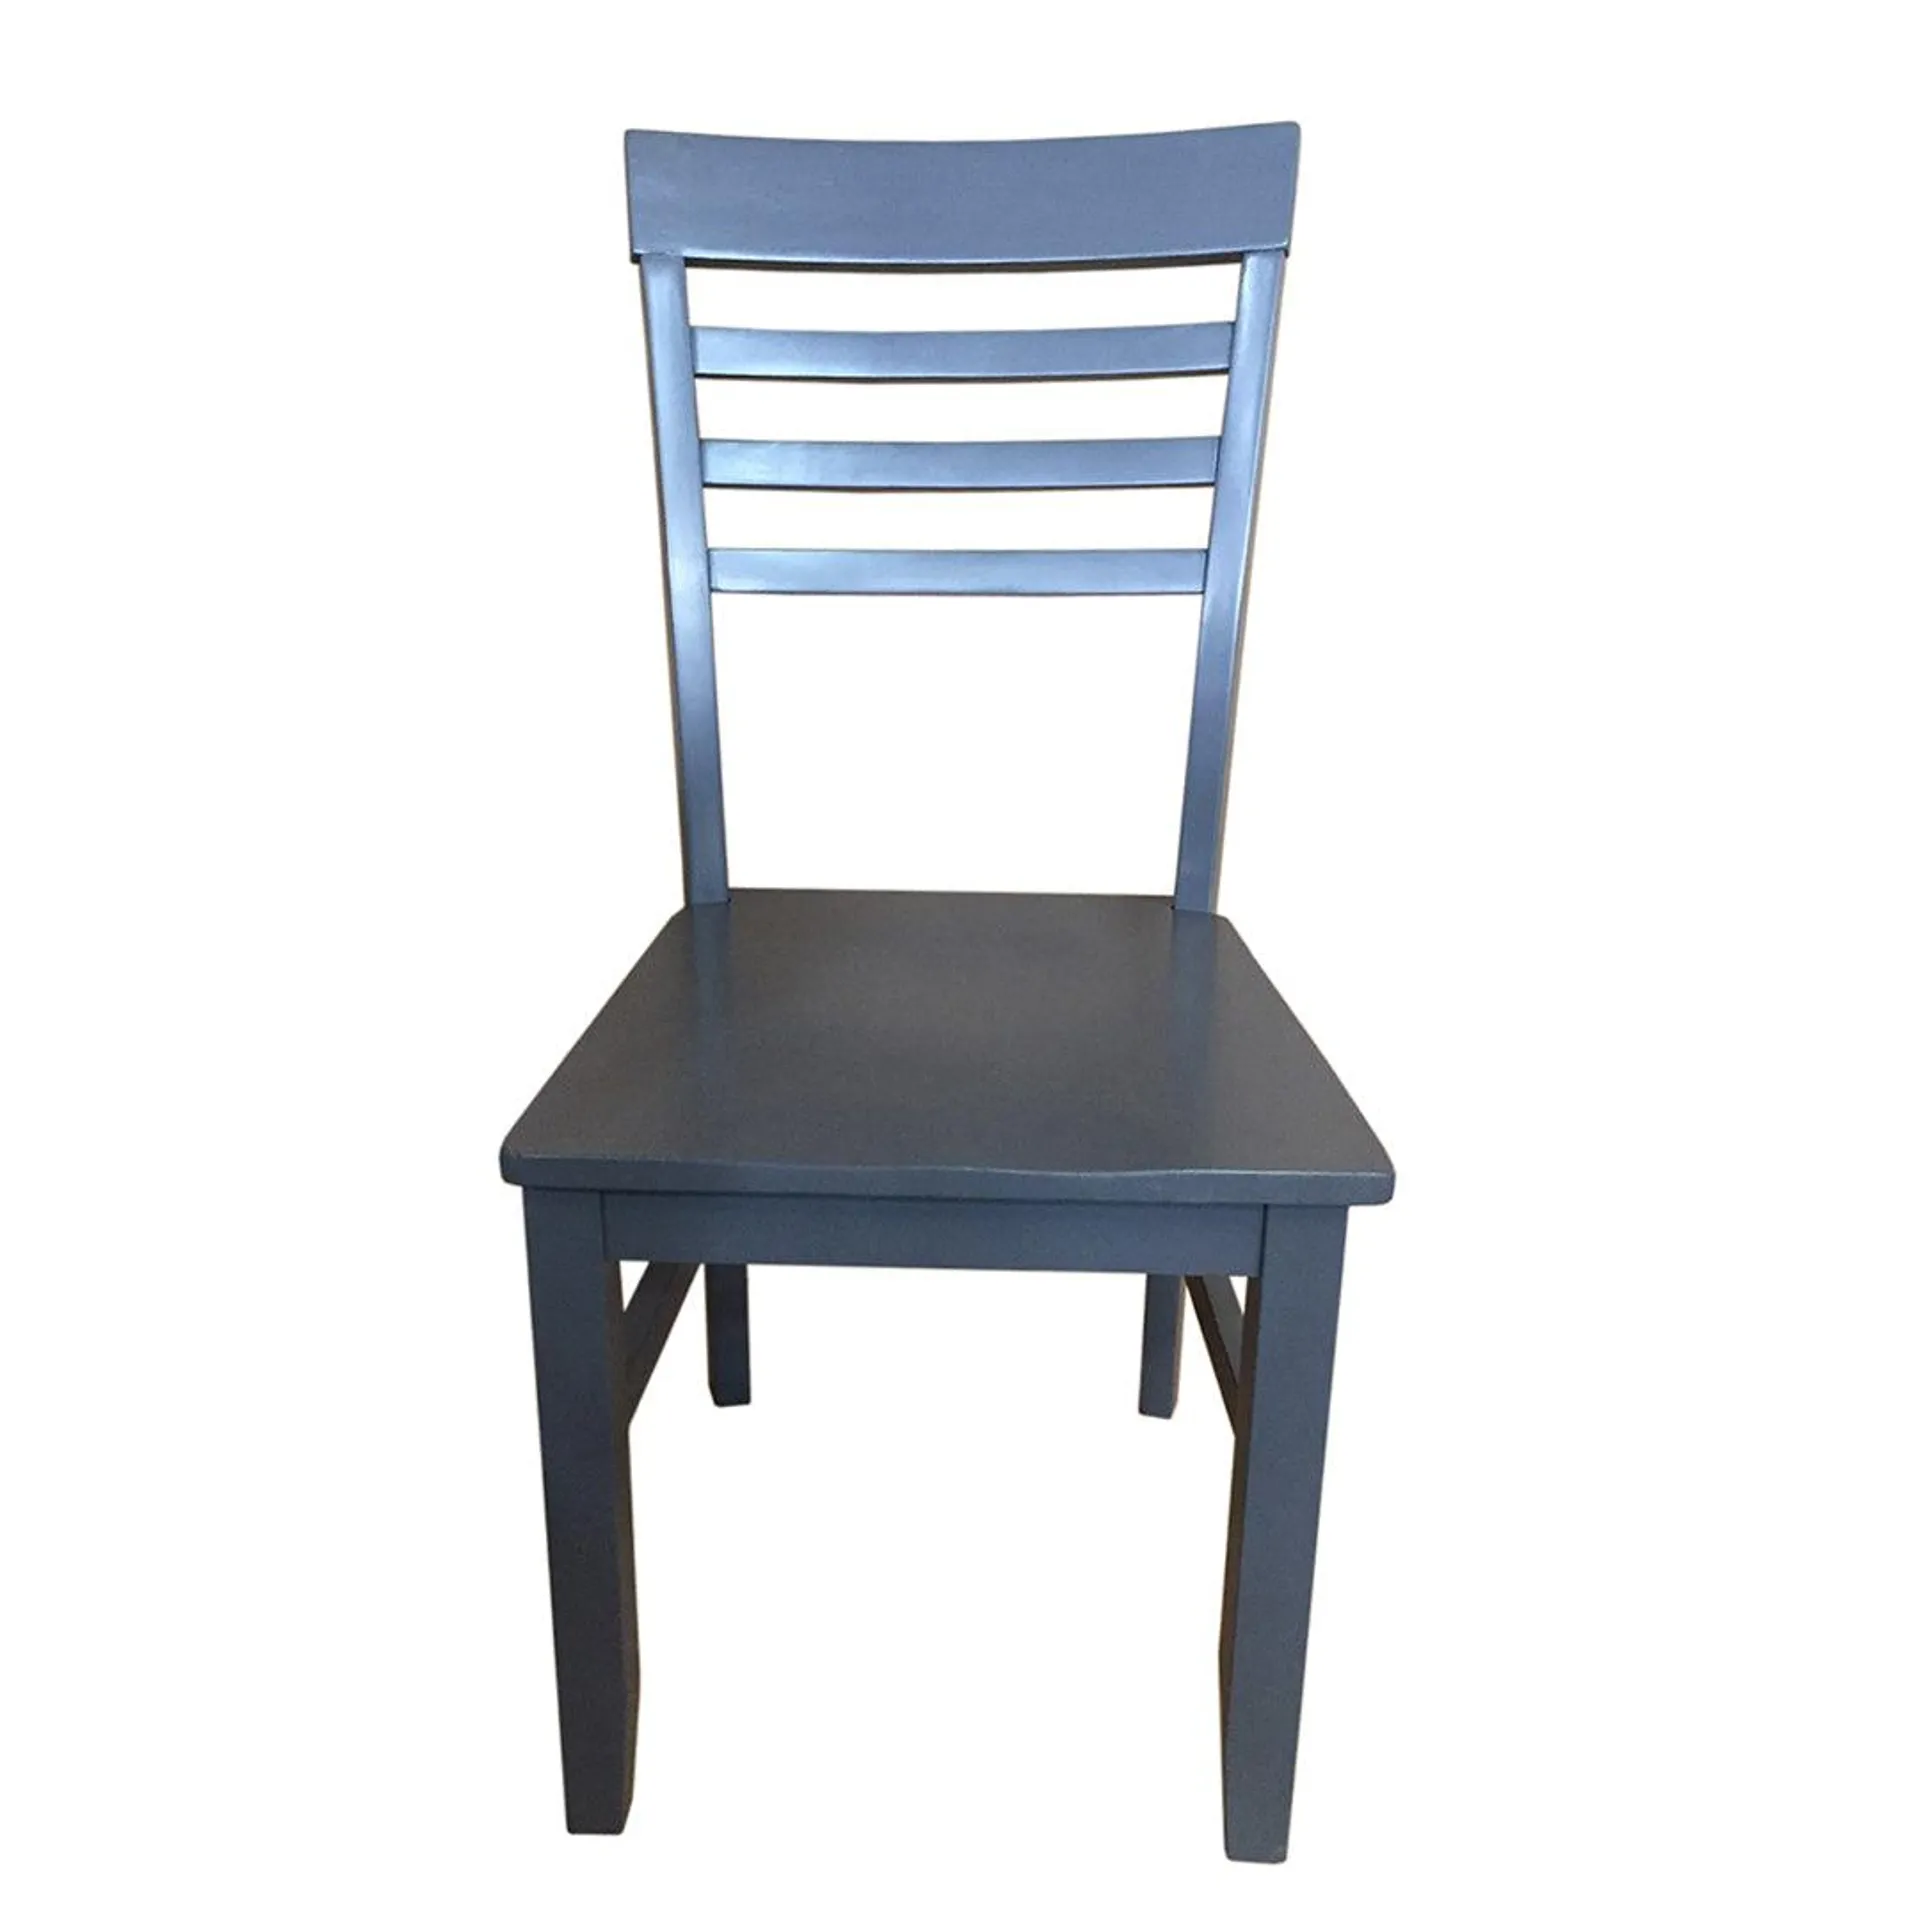 Frisco Wood Dining Chair (2 colors)